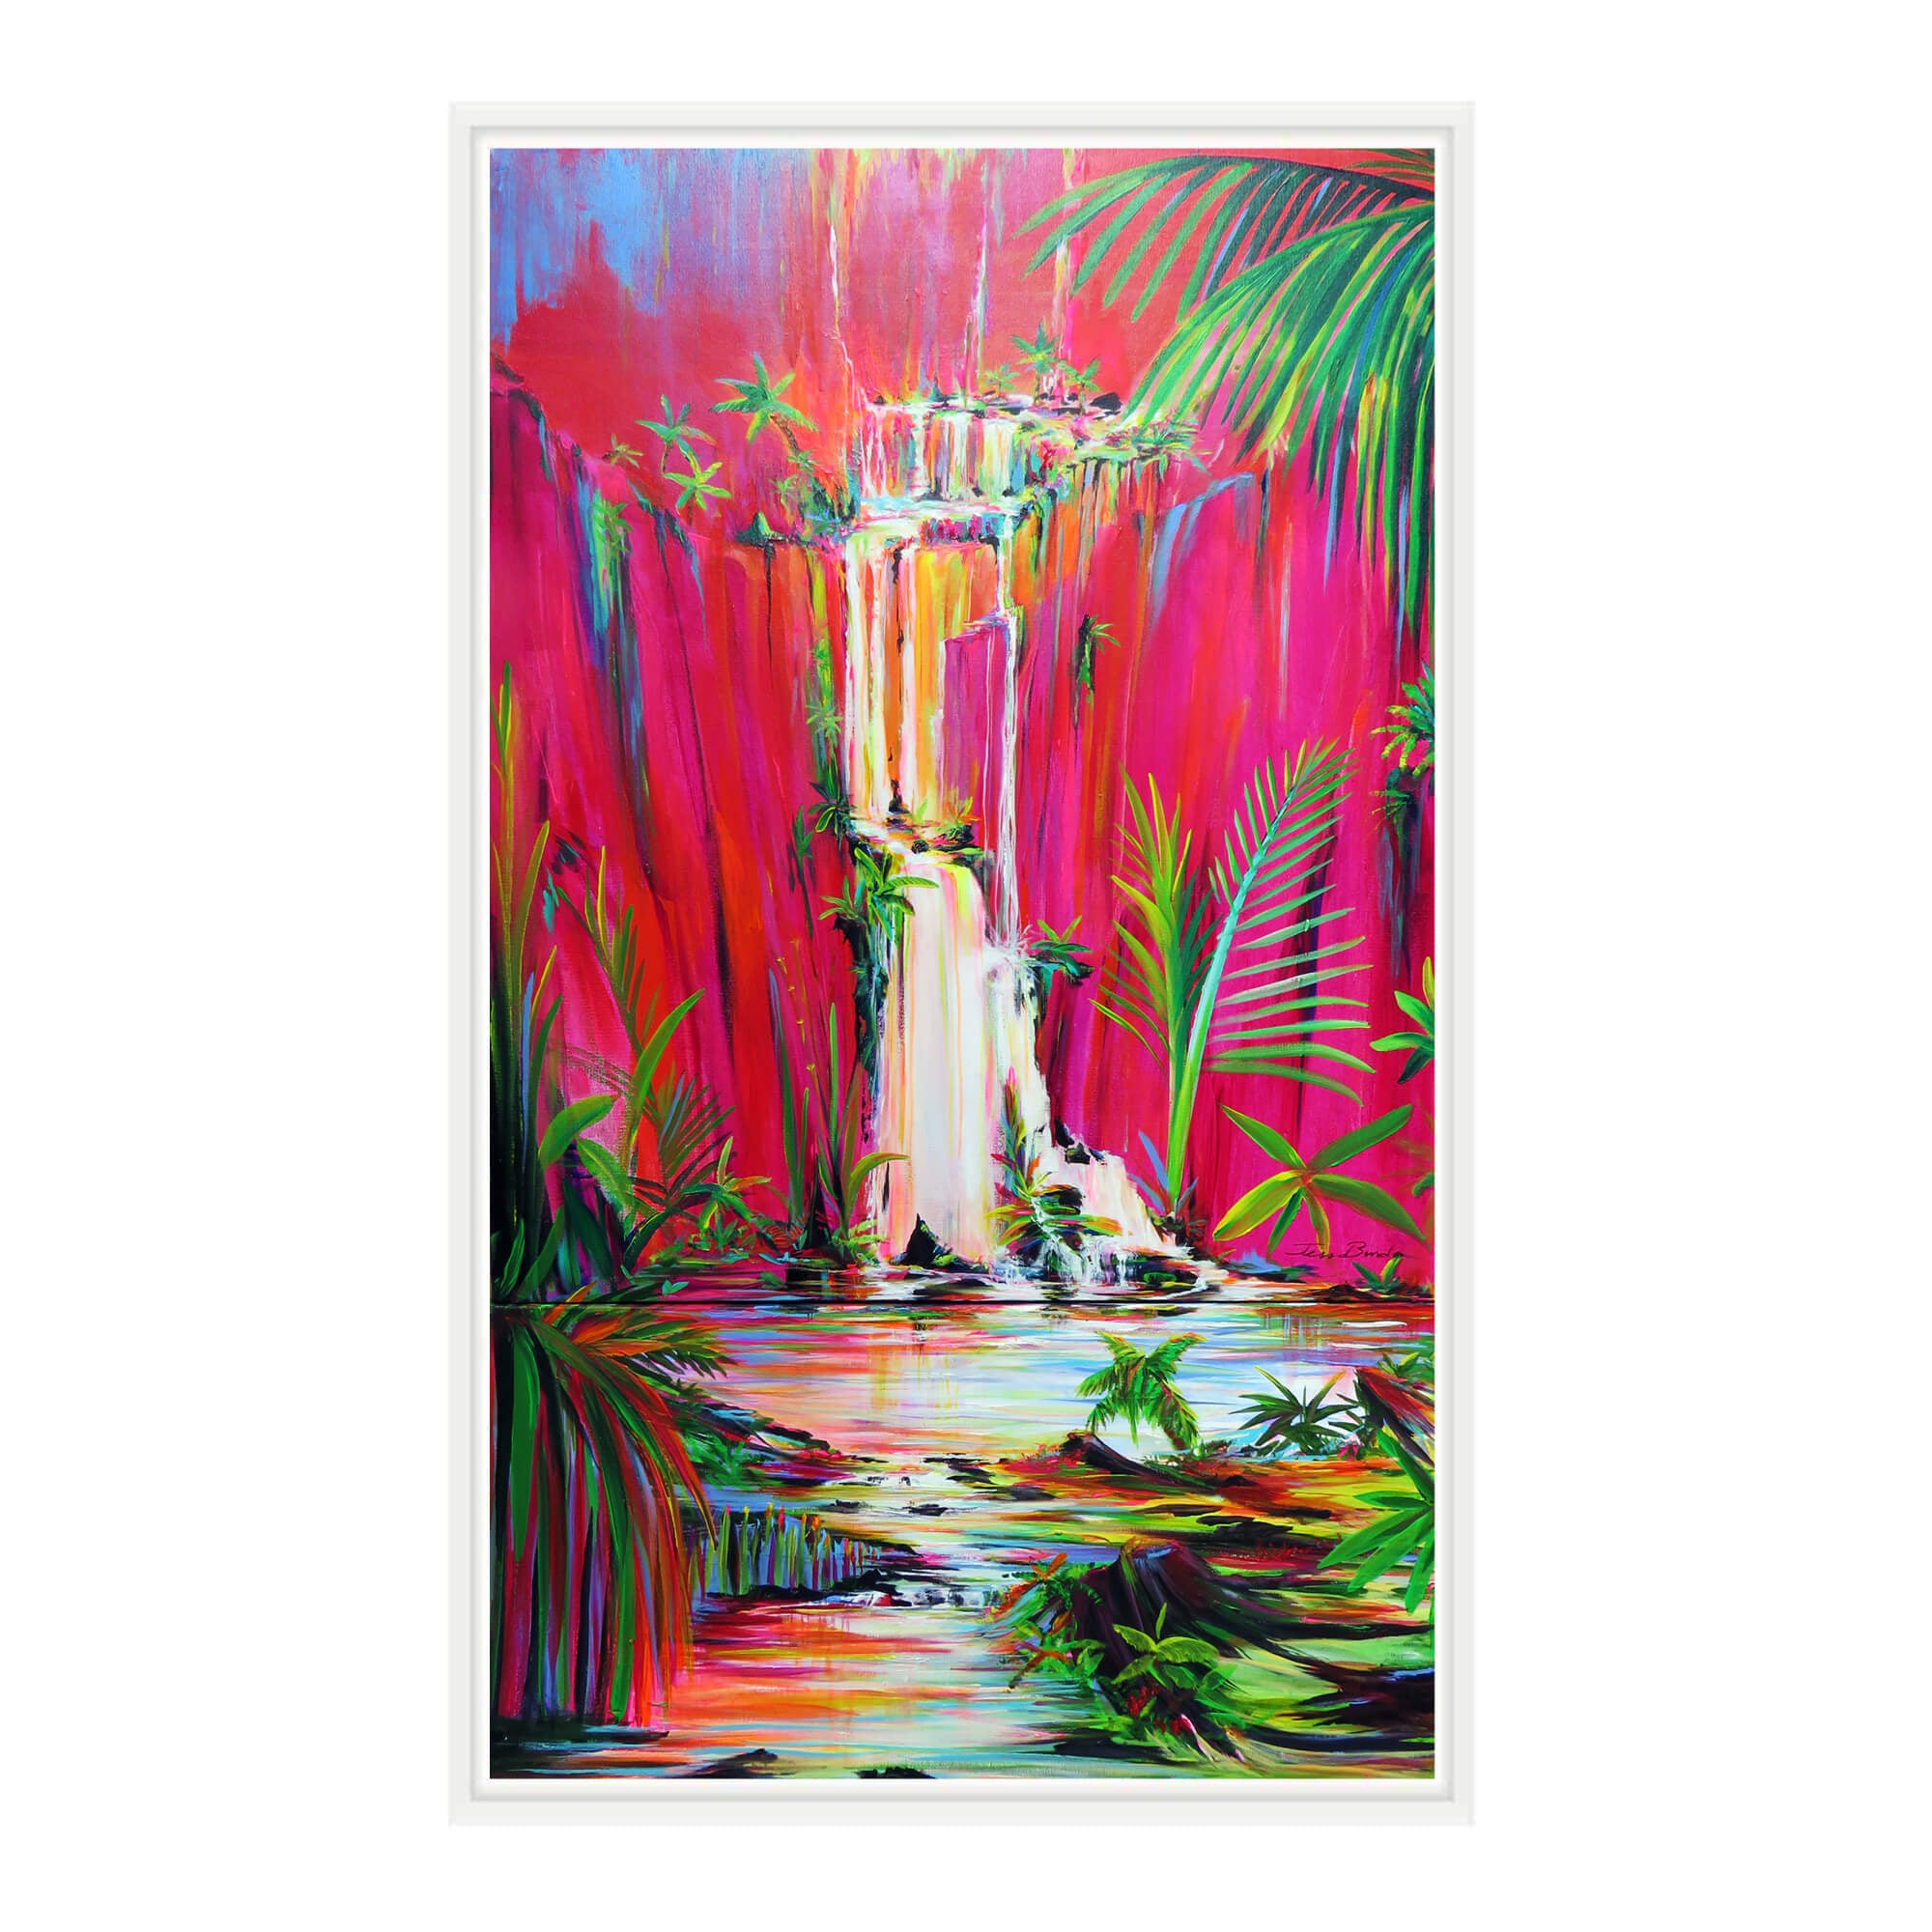 A waterfall surrounded by tropical plants by Hawaii artist Jess Burda